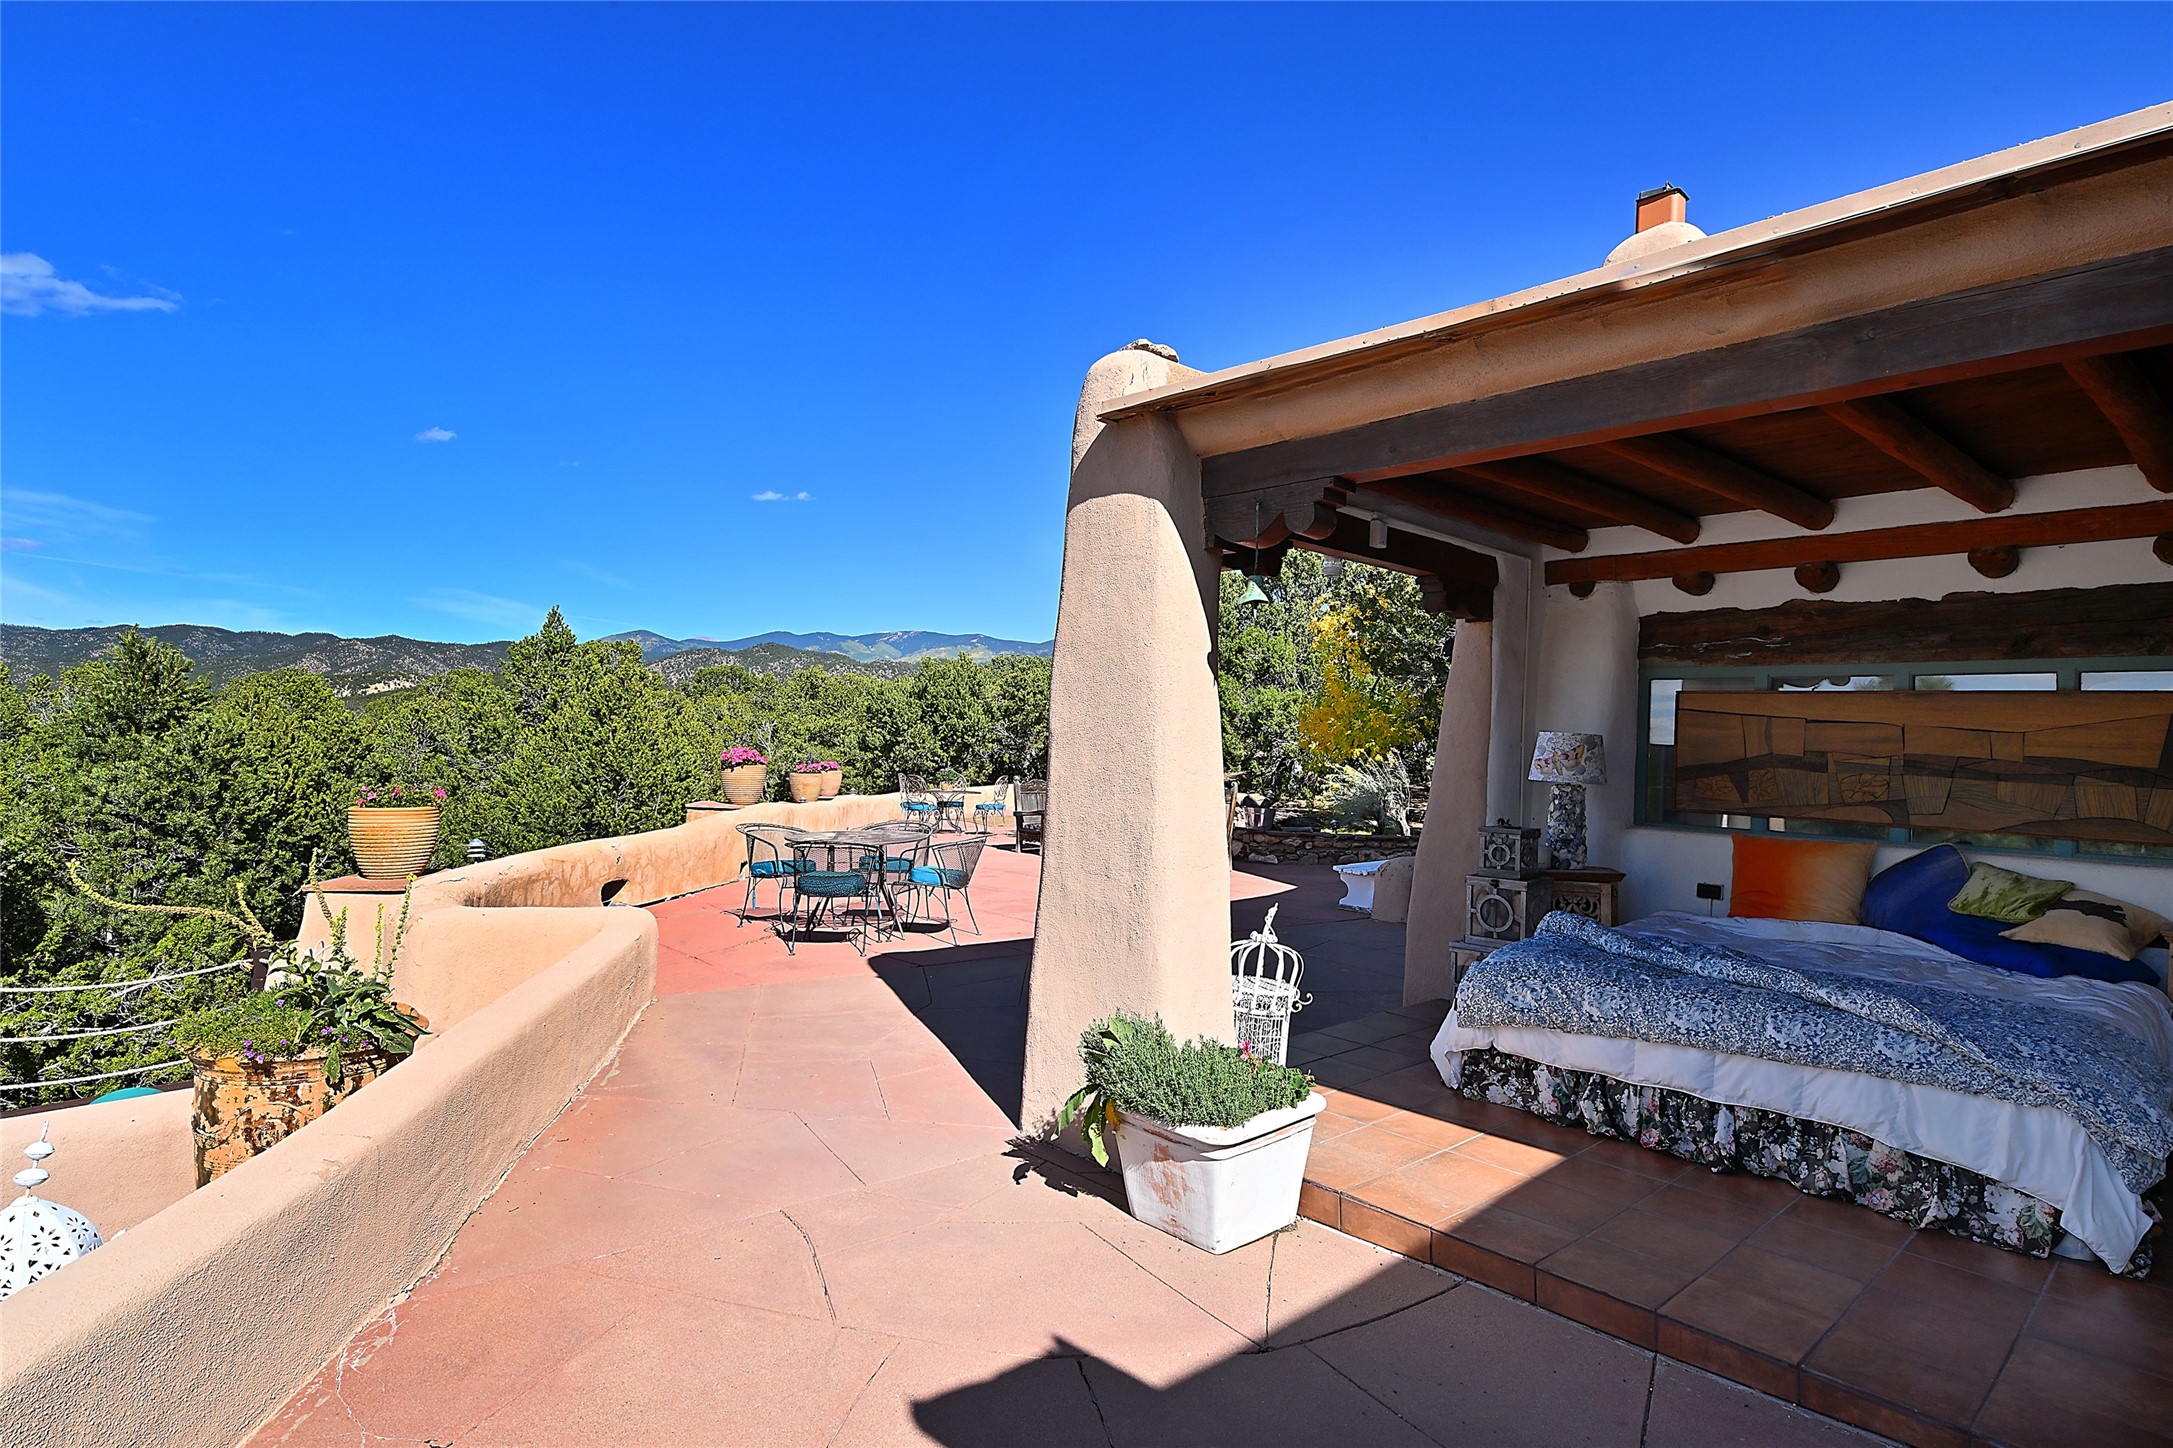 185 Brownell Howland, Santa Fe, New Mexico 87501, 5 Bedrooms Bedrooms, ,6 BathroomsBathrooms,Residential,For Sale,185 Brownell Howland,202341636